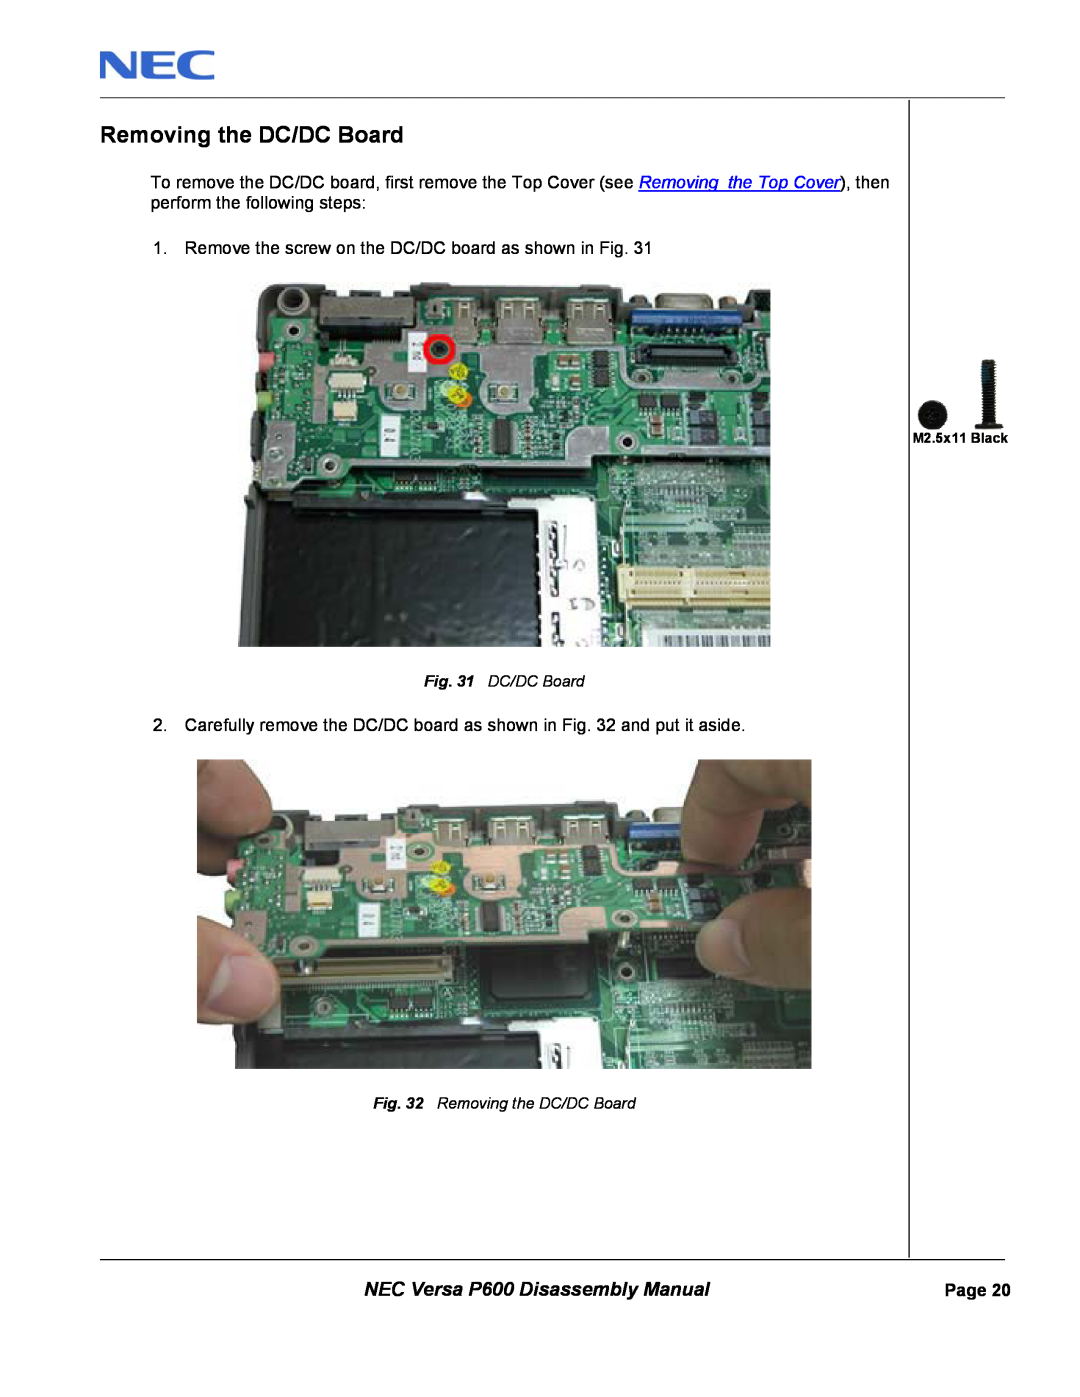 NEC manual Removing the DC/DC Board, NEC Versa P600 Disassembly Manual 